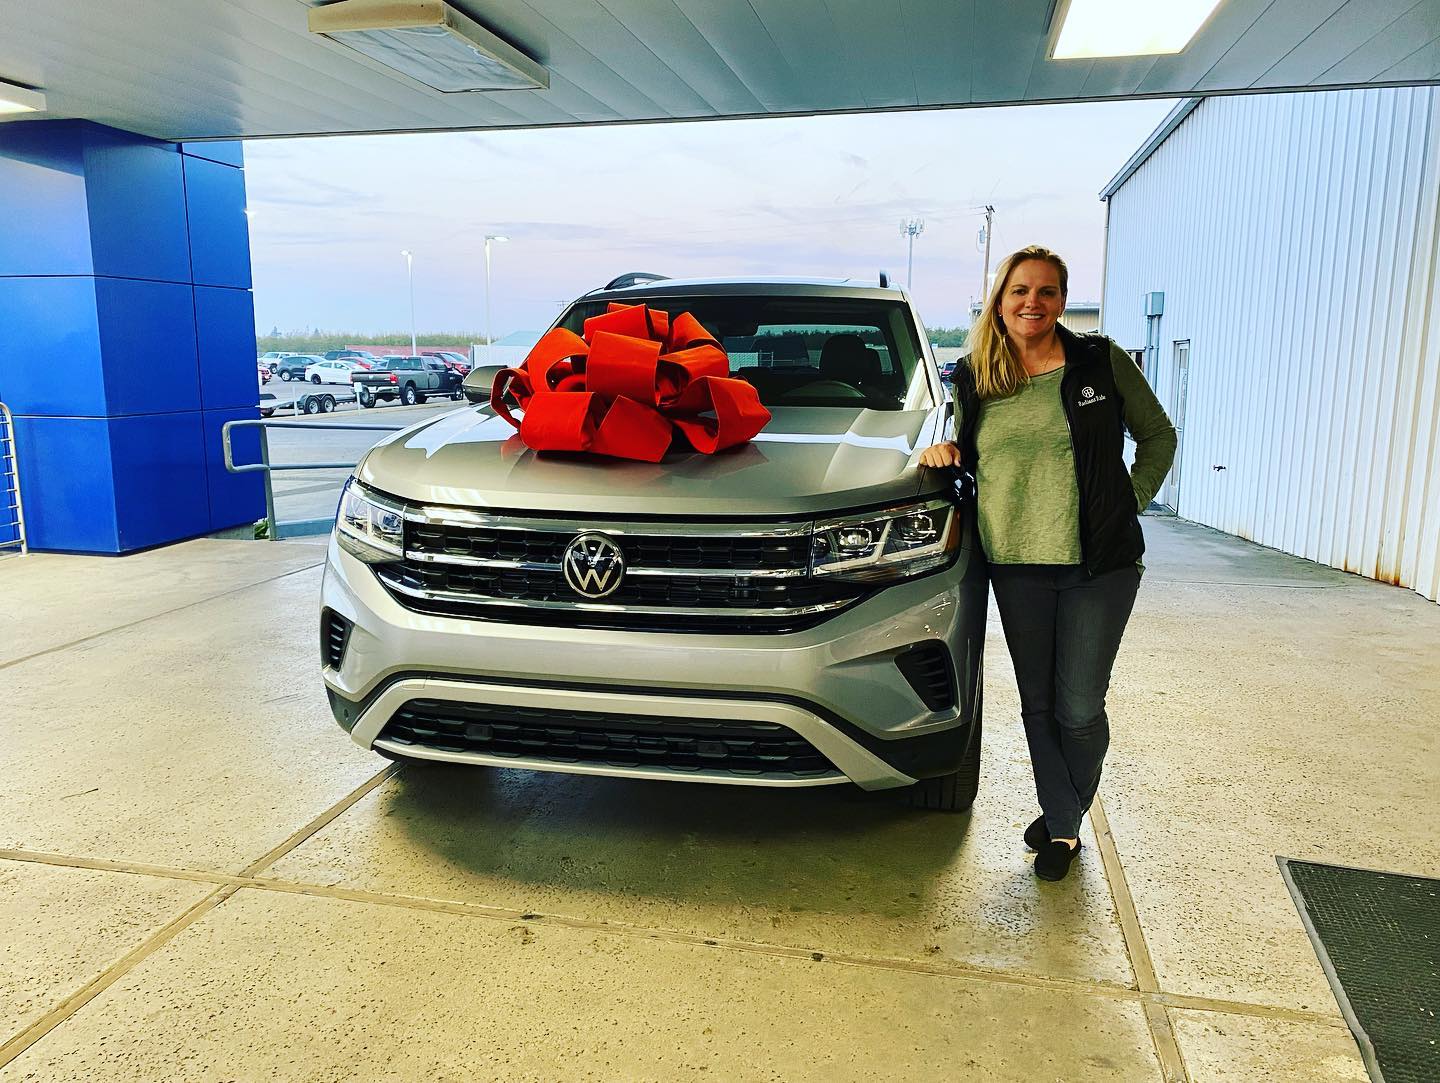 Kelly, an employee of Radiant Ride just purchased a 2022 VW Atlas @central.valley.hyundaivw. We love the Central Valley auto group! Greg in sales has superb customer service as well as Lucas in finance. They made the process seamless and painless. Thank you Central Valley VW!